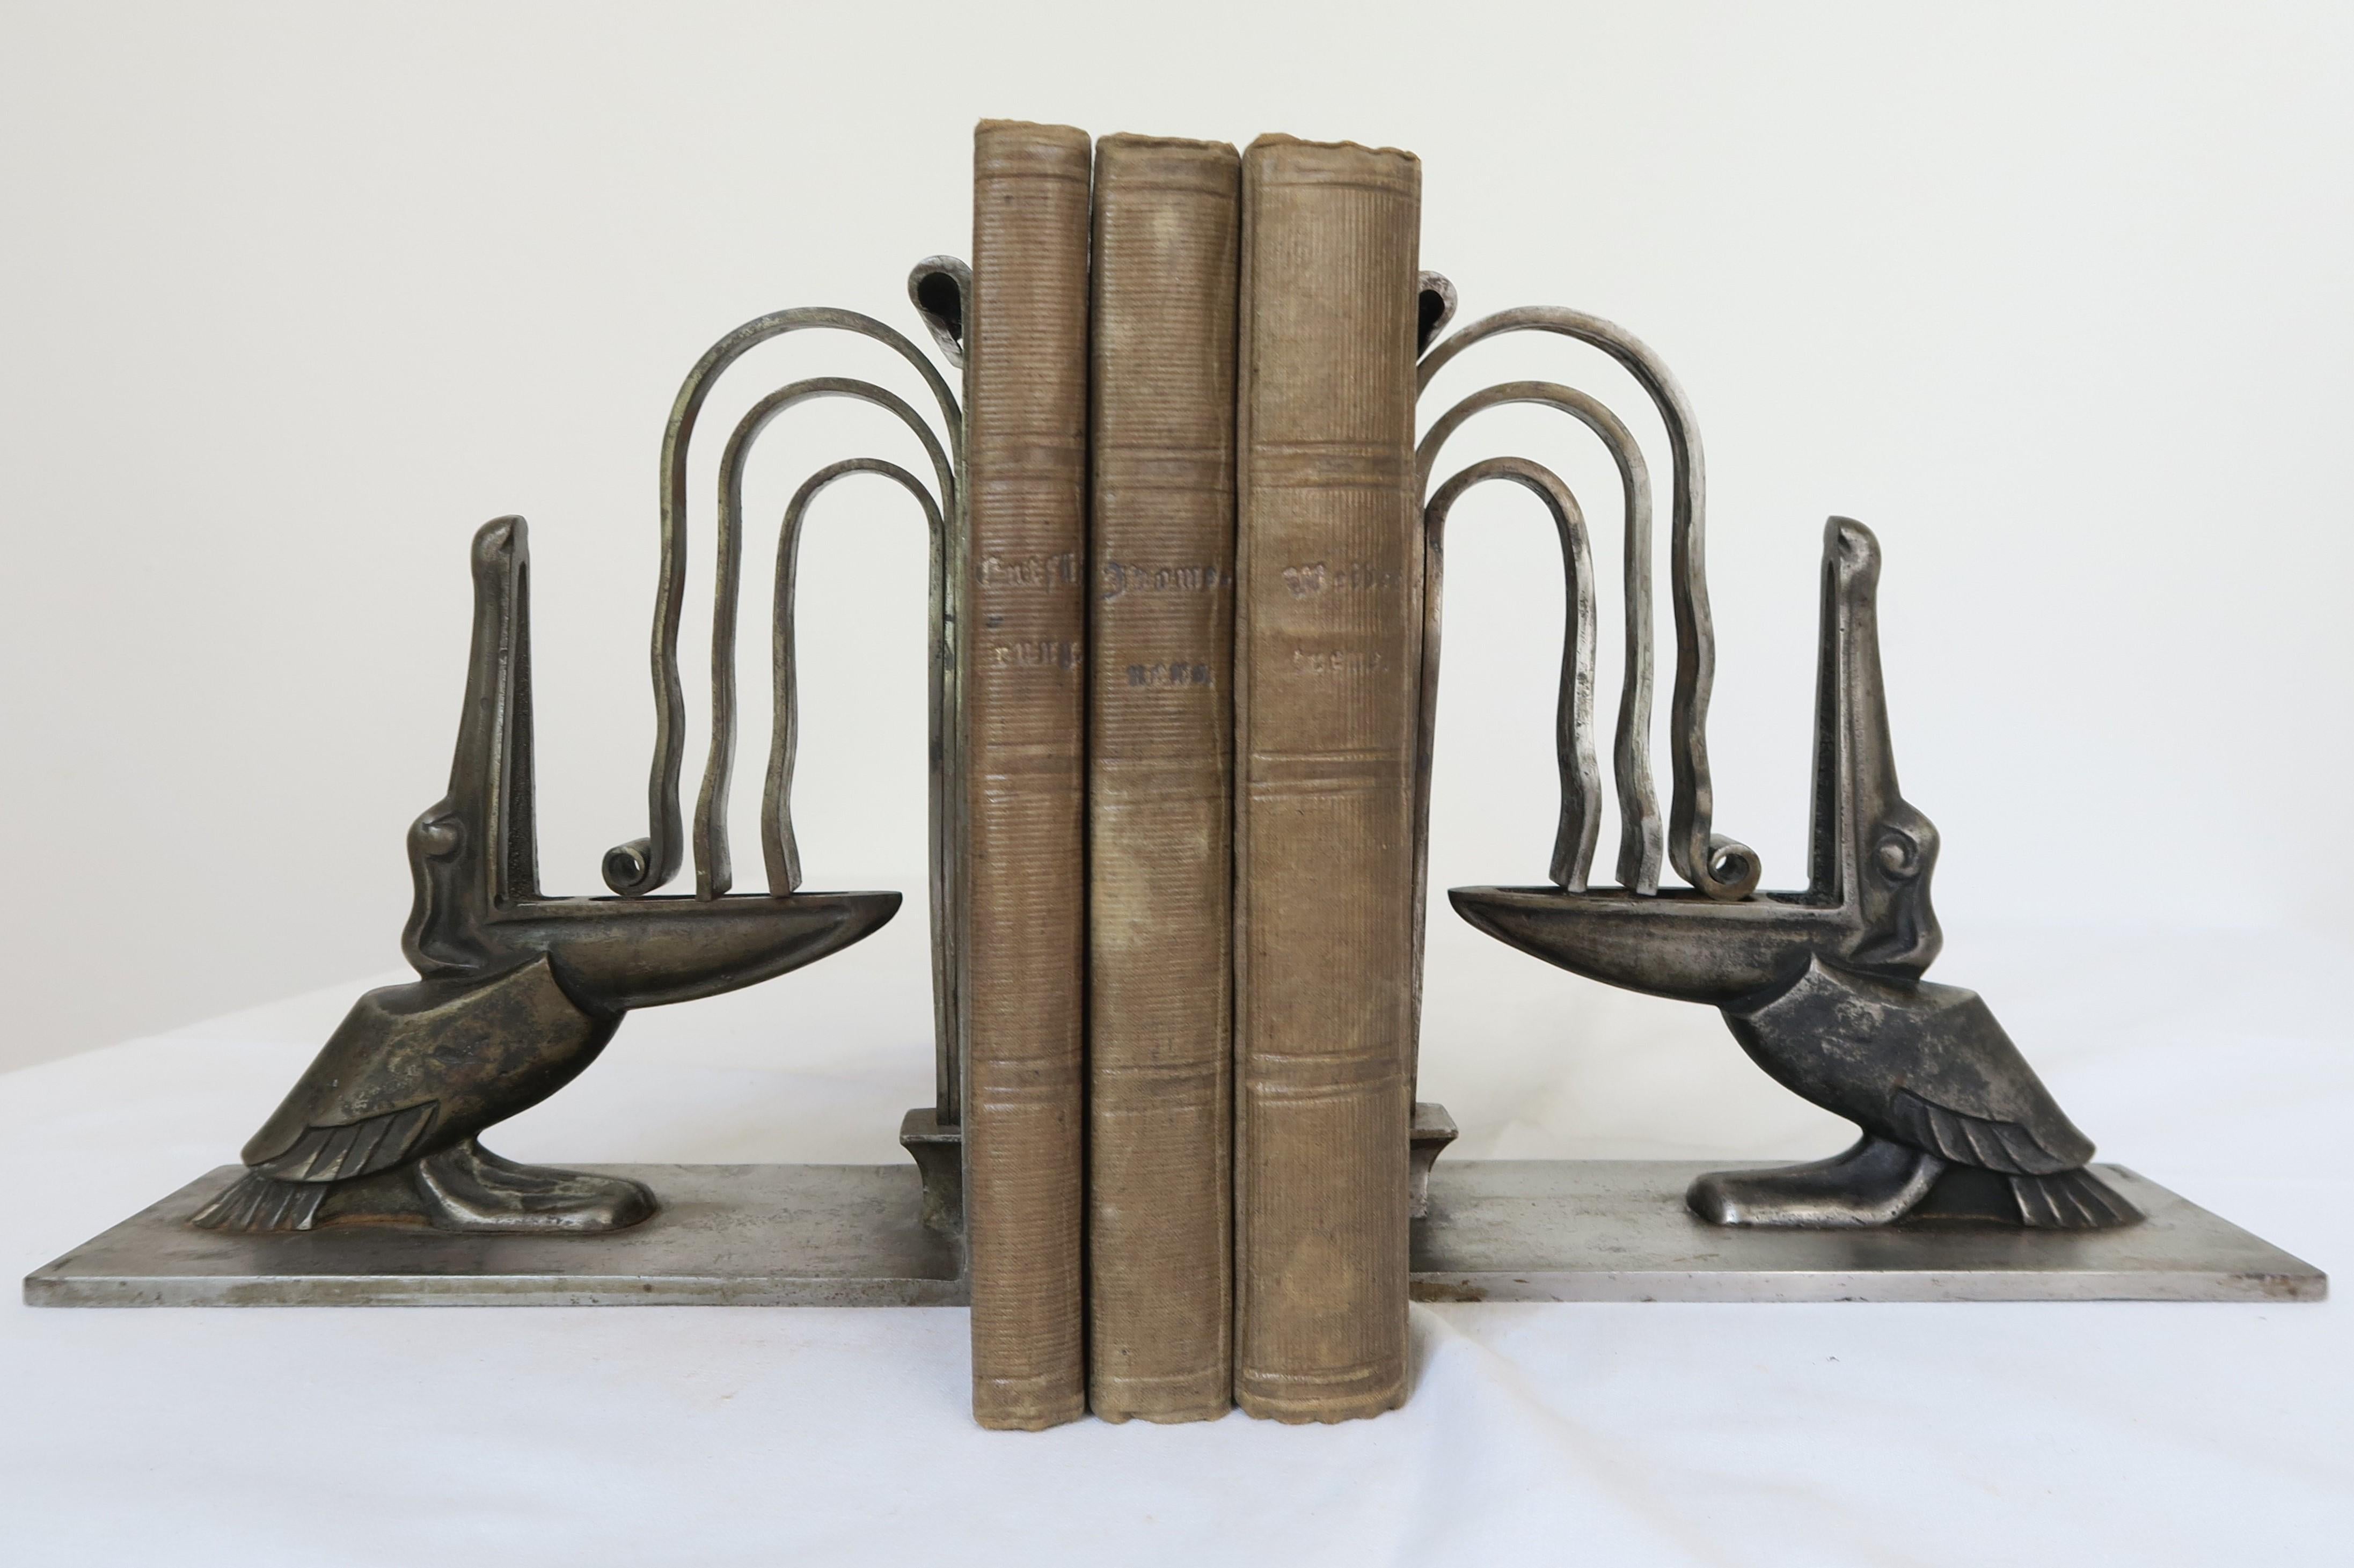 For sale is a unique pair of Art Deco bookends by Edgar Brandt (1880-1960). They are wrought iron and each modelled as pelicns with open beaks catching a fountain of water.
They are in excellent, original condition. No modifications or restorations